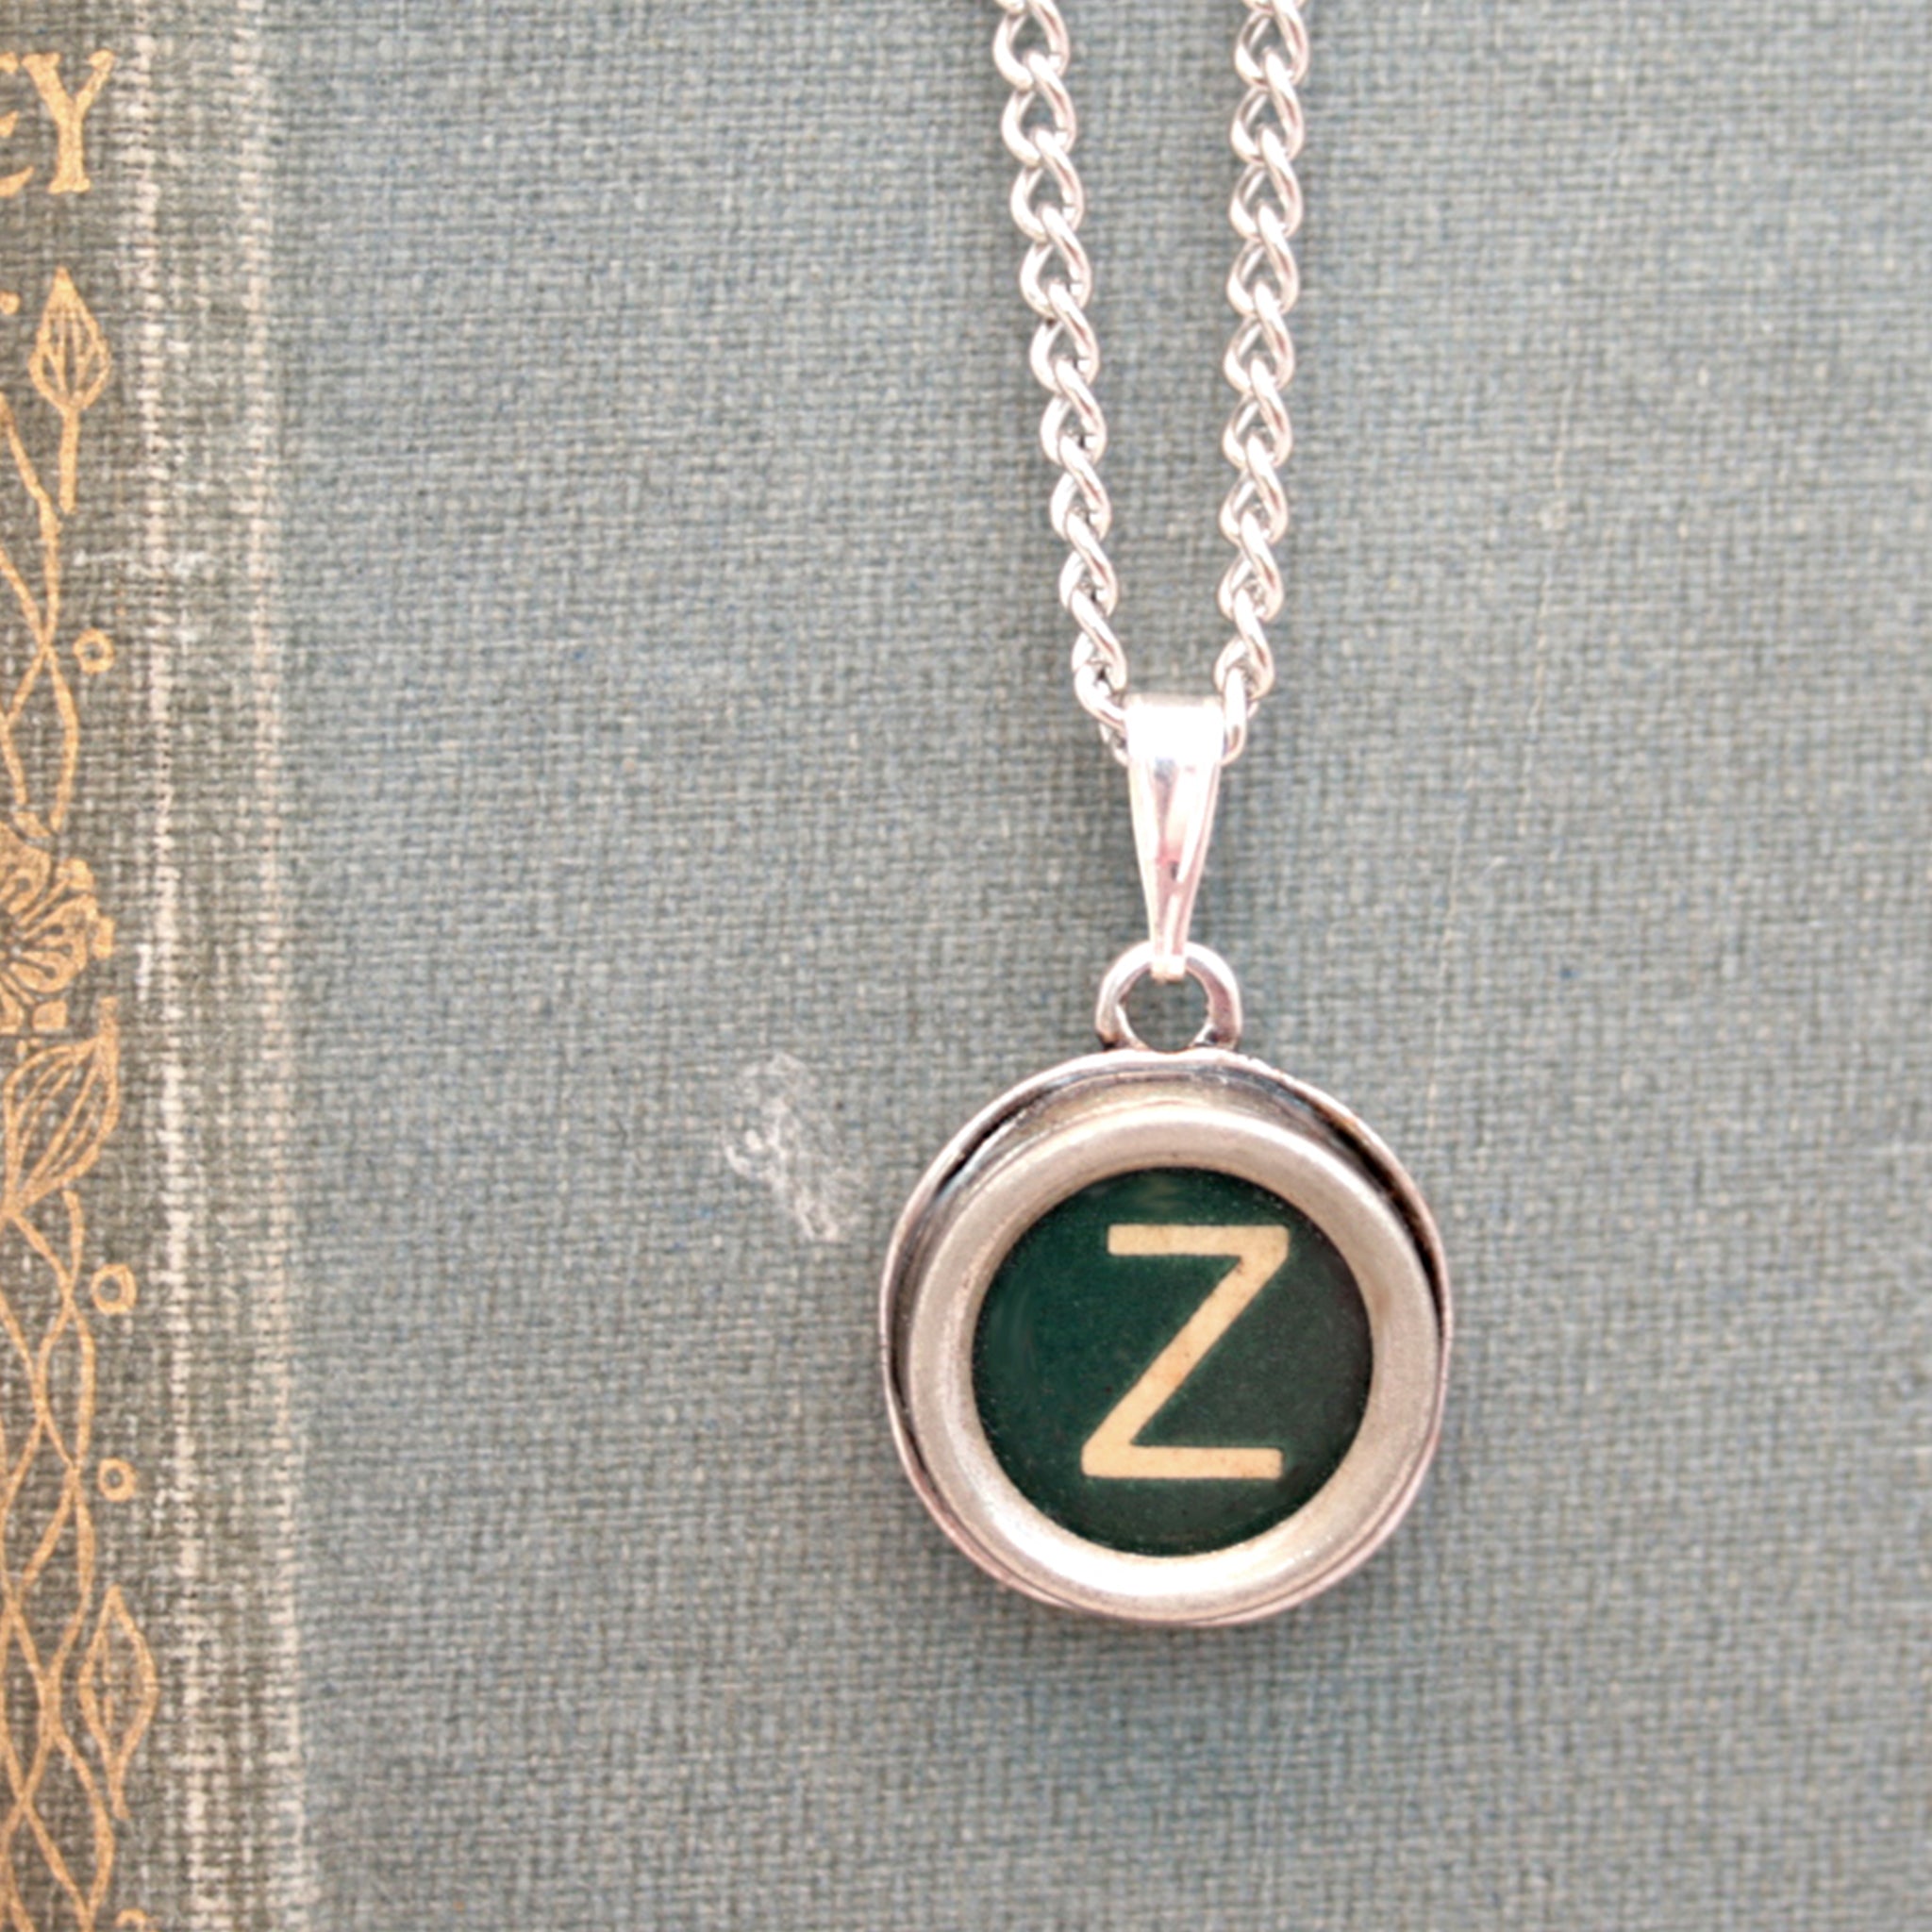 Green Z letter necklace made of real typewriter key